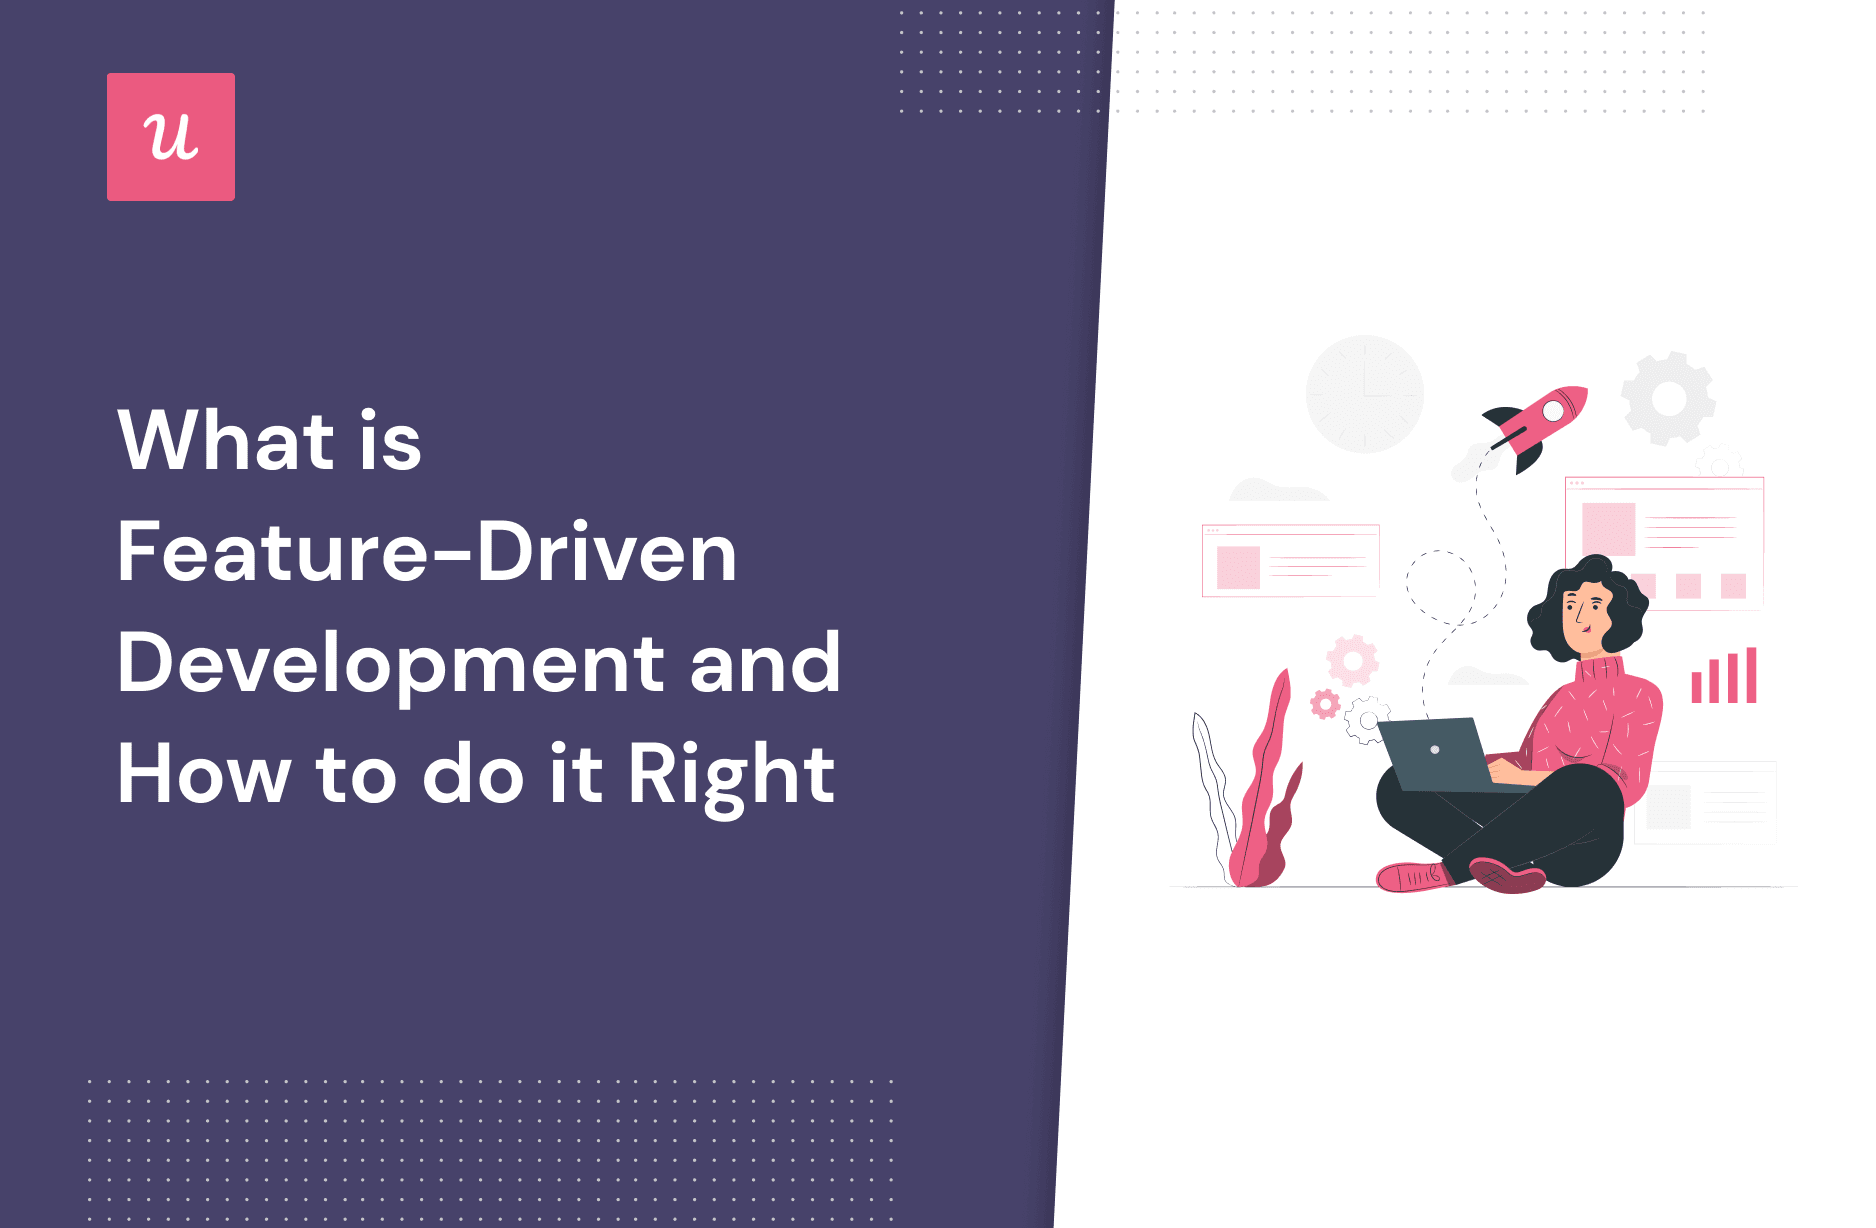 What is Feature-Driven Development and How to Do it Right cover